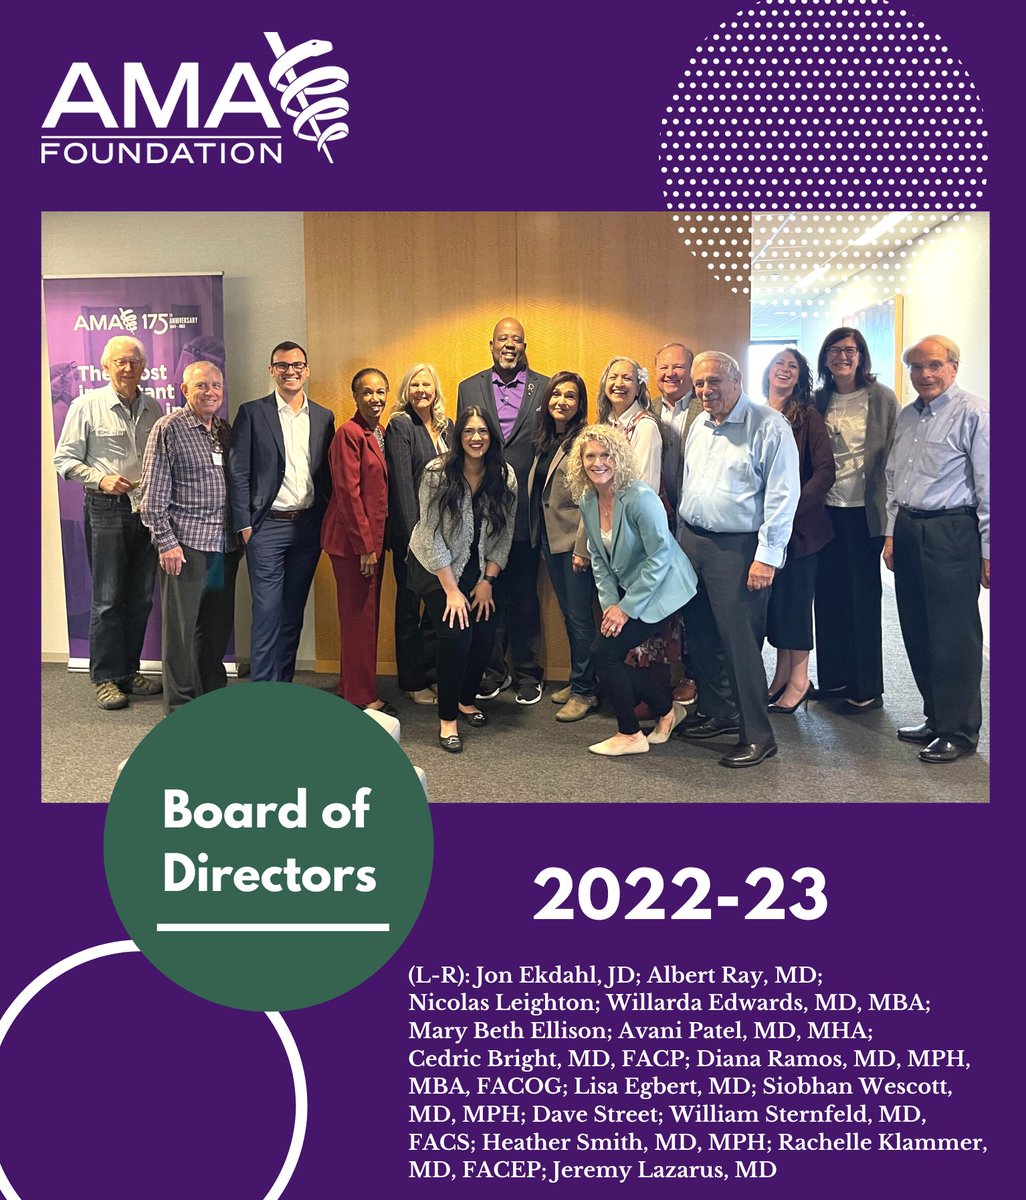 Our board of directors recently convened in Chicago to learn about health care issues our industry partners are addressing and to discuss AMAF health equity initiatives. We are thankful for their leadership, service and support! #AMAF #Leadership #HealthEquity #Service